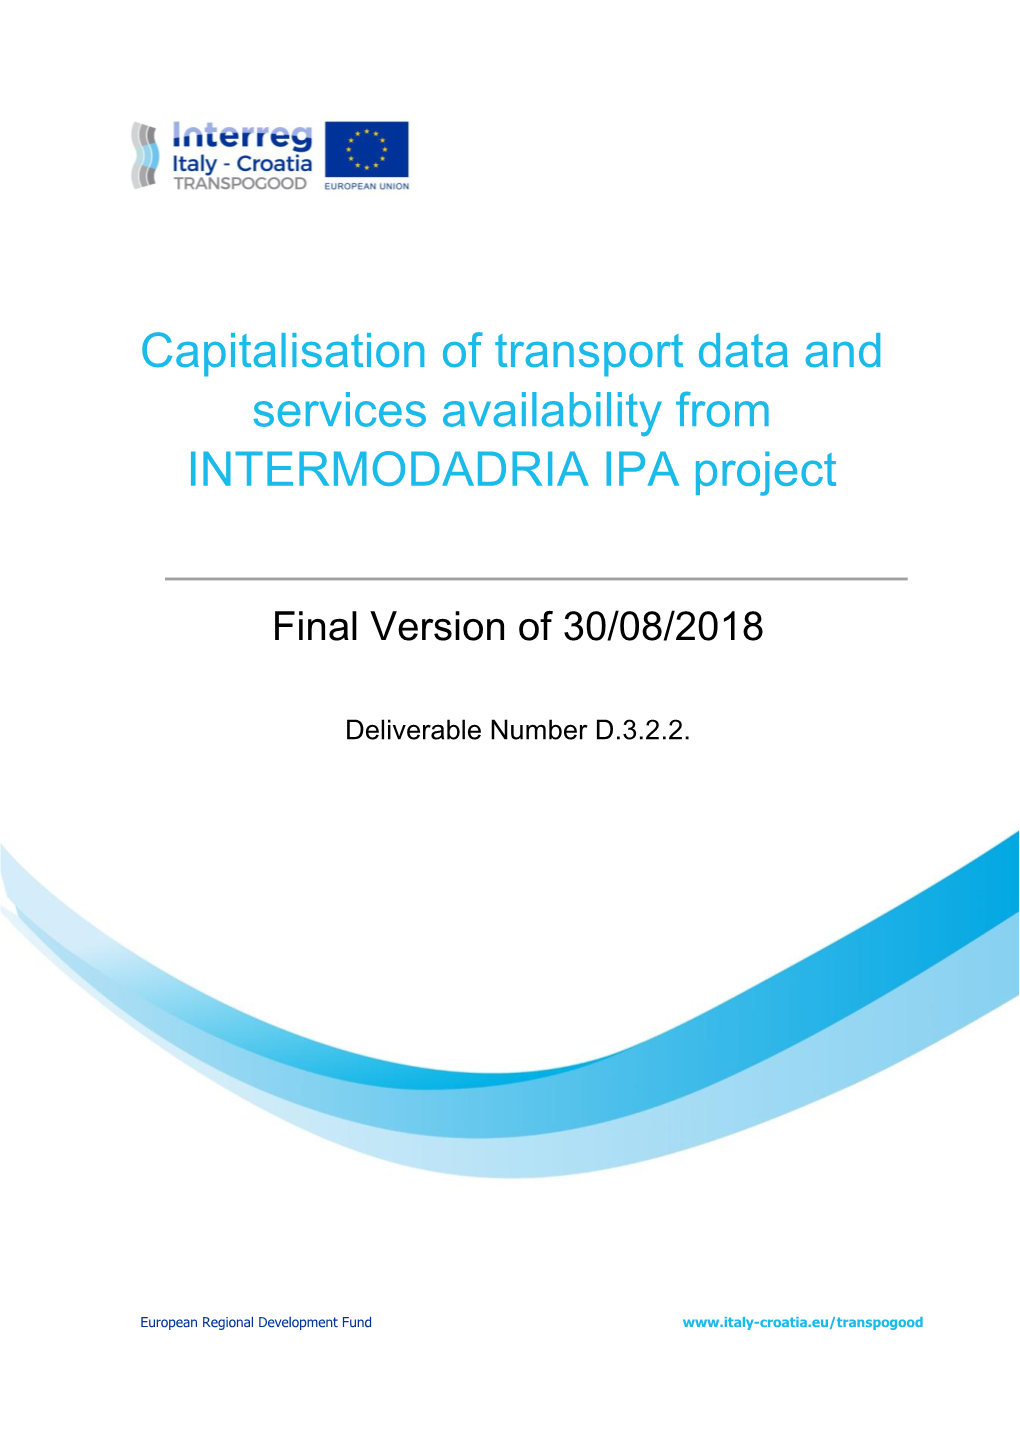 Capitalisation of Transport Data and Services Availability from INTERMODADRIA IPA Project